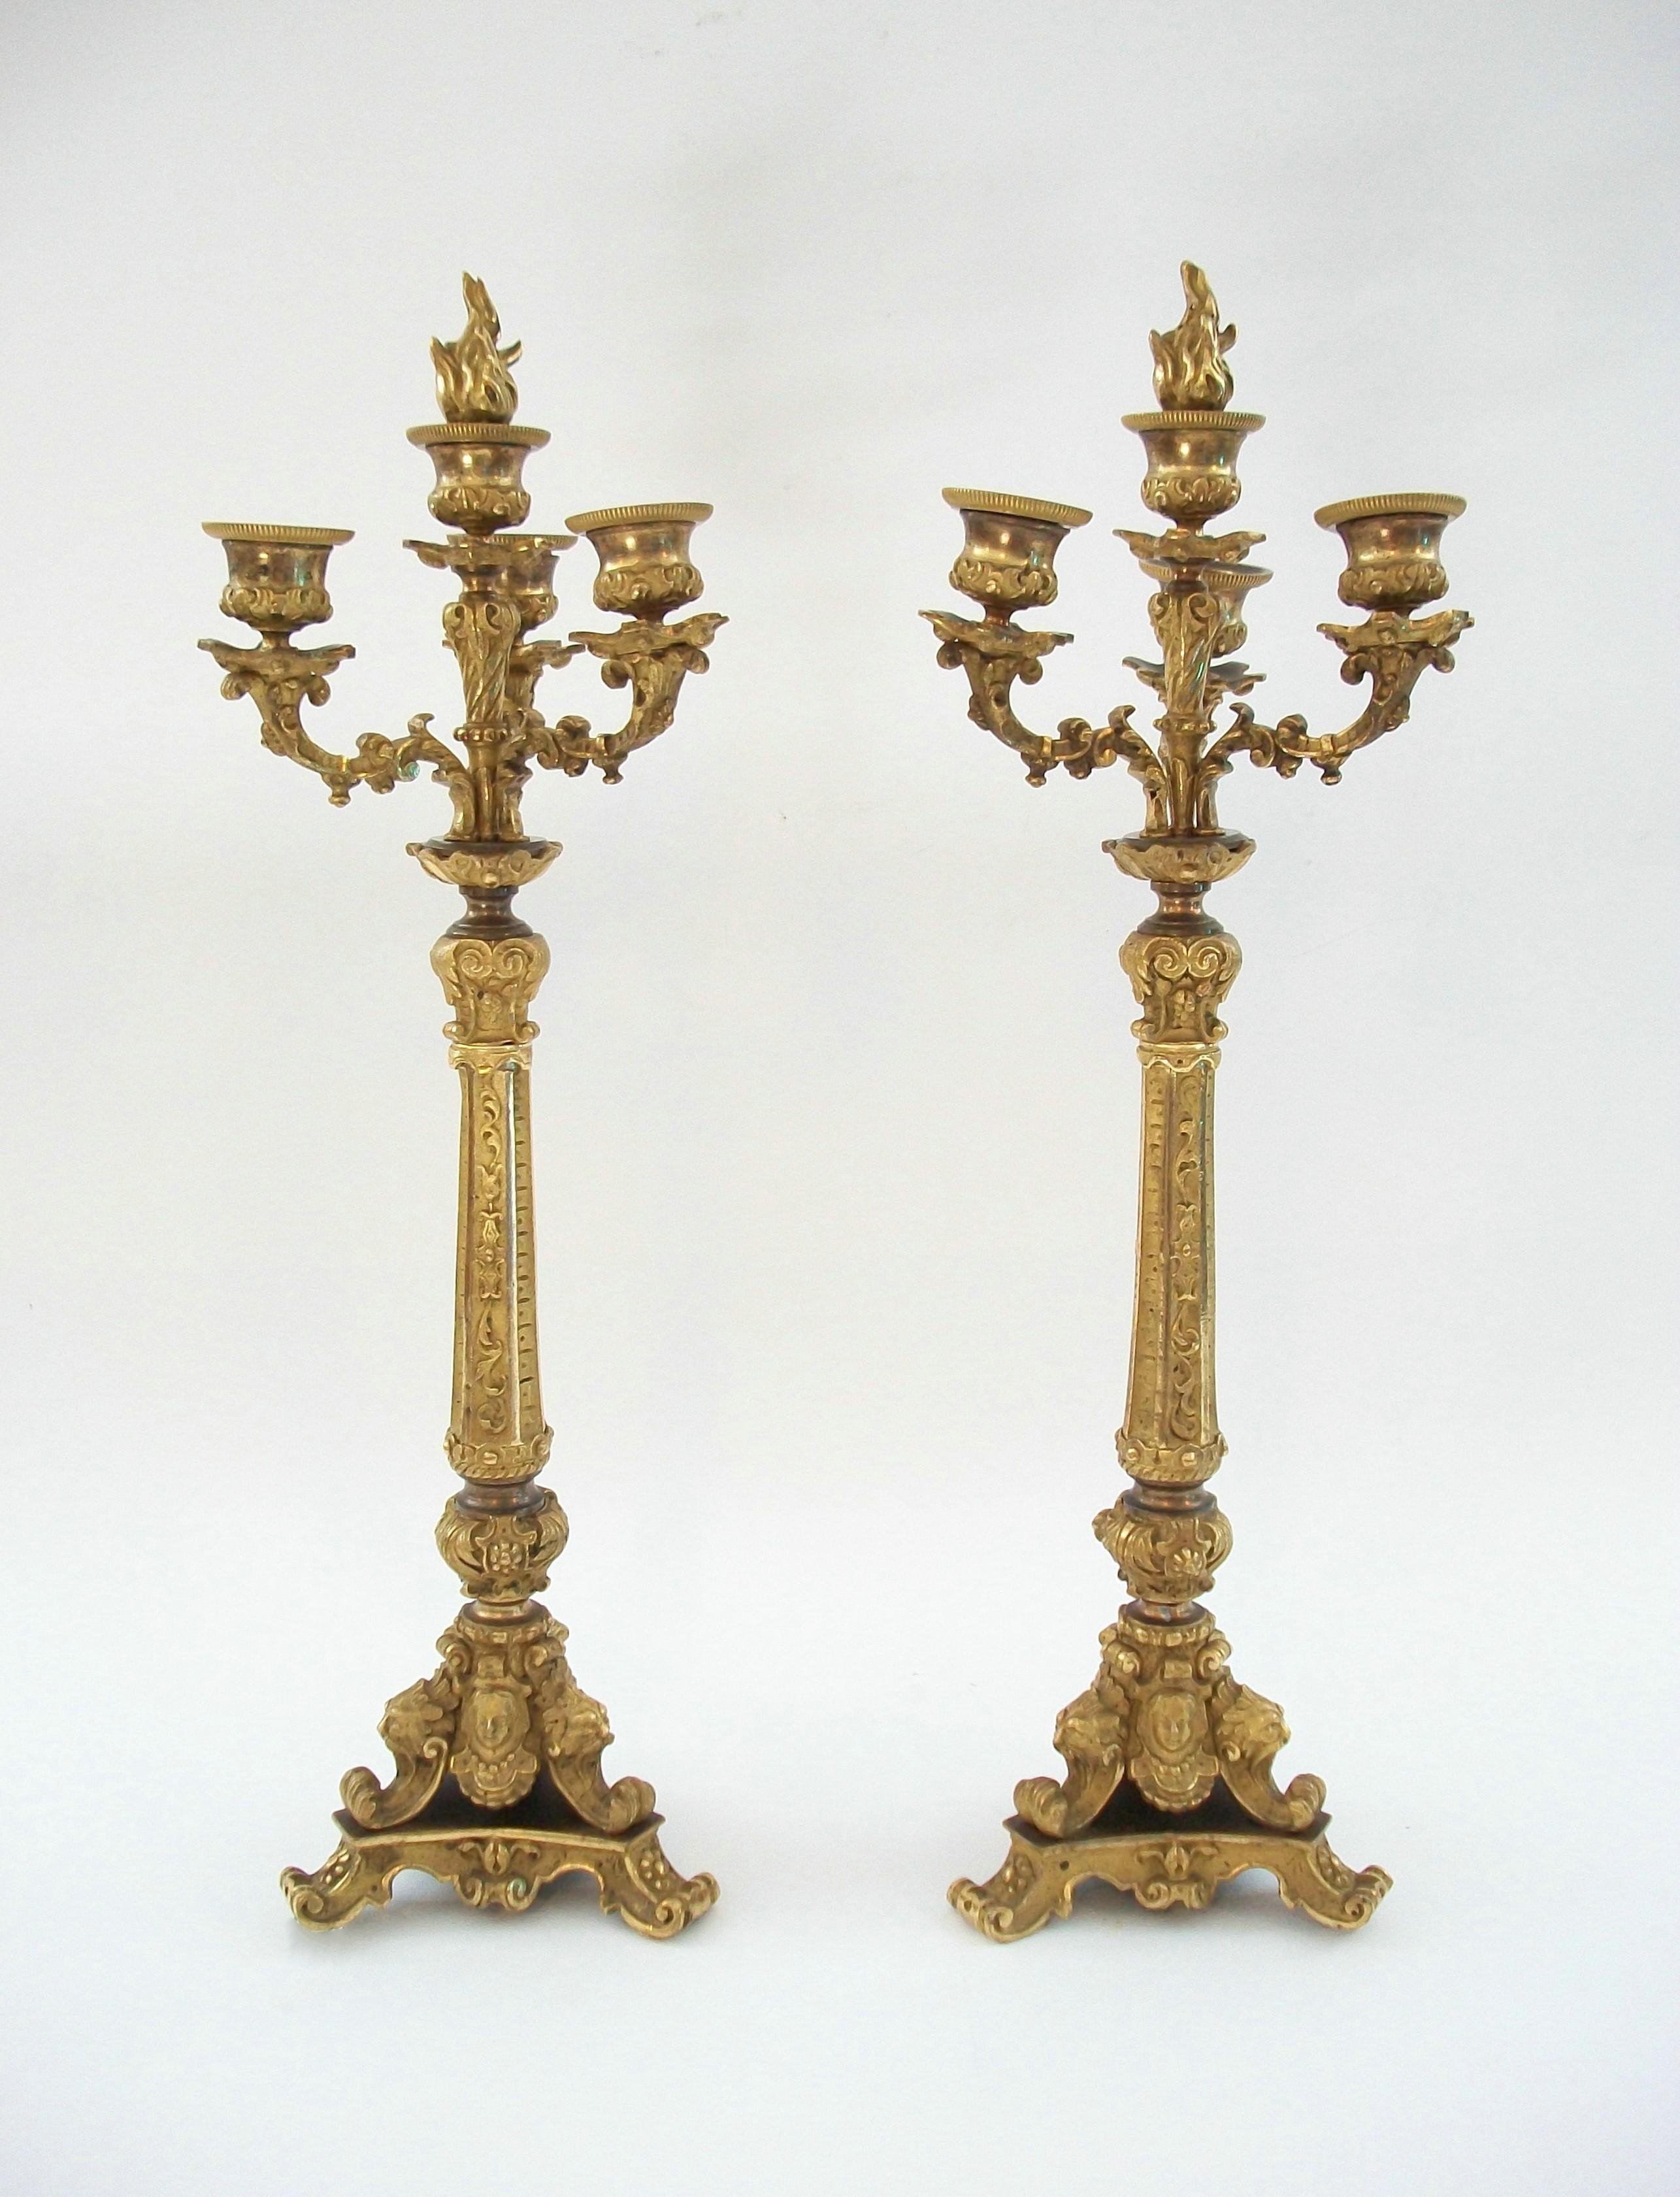 
Antique pair of Restoration period gilt bronze candelabra - featuring elaborate Neo Gothic bronze castings of masks, lions and scrolls on trefoil bases with hand hammered and chiseled details topped off with fire gilt highlights - original patina